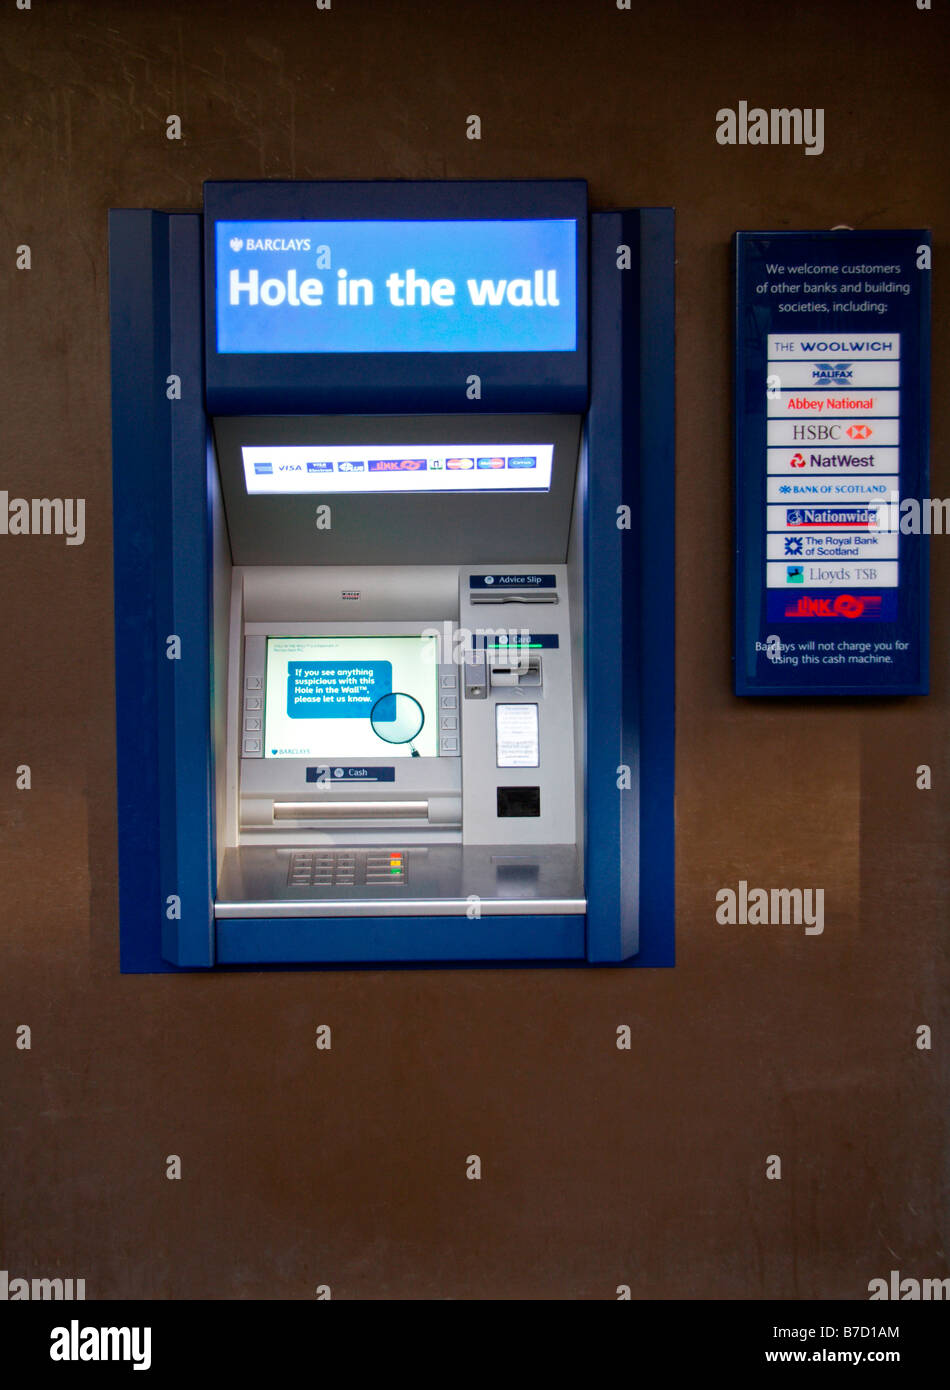 A Barclays ATM (hole in the wall) cash machine in Oxford England.  Jan 2009 Stock Photo